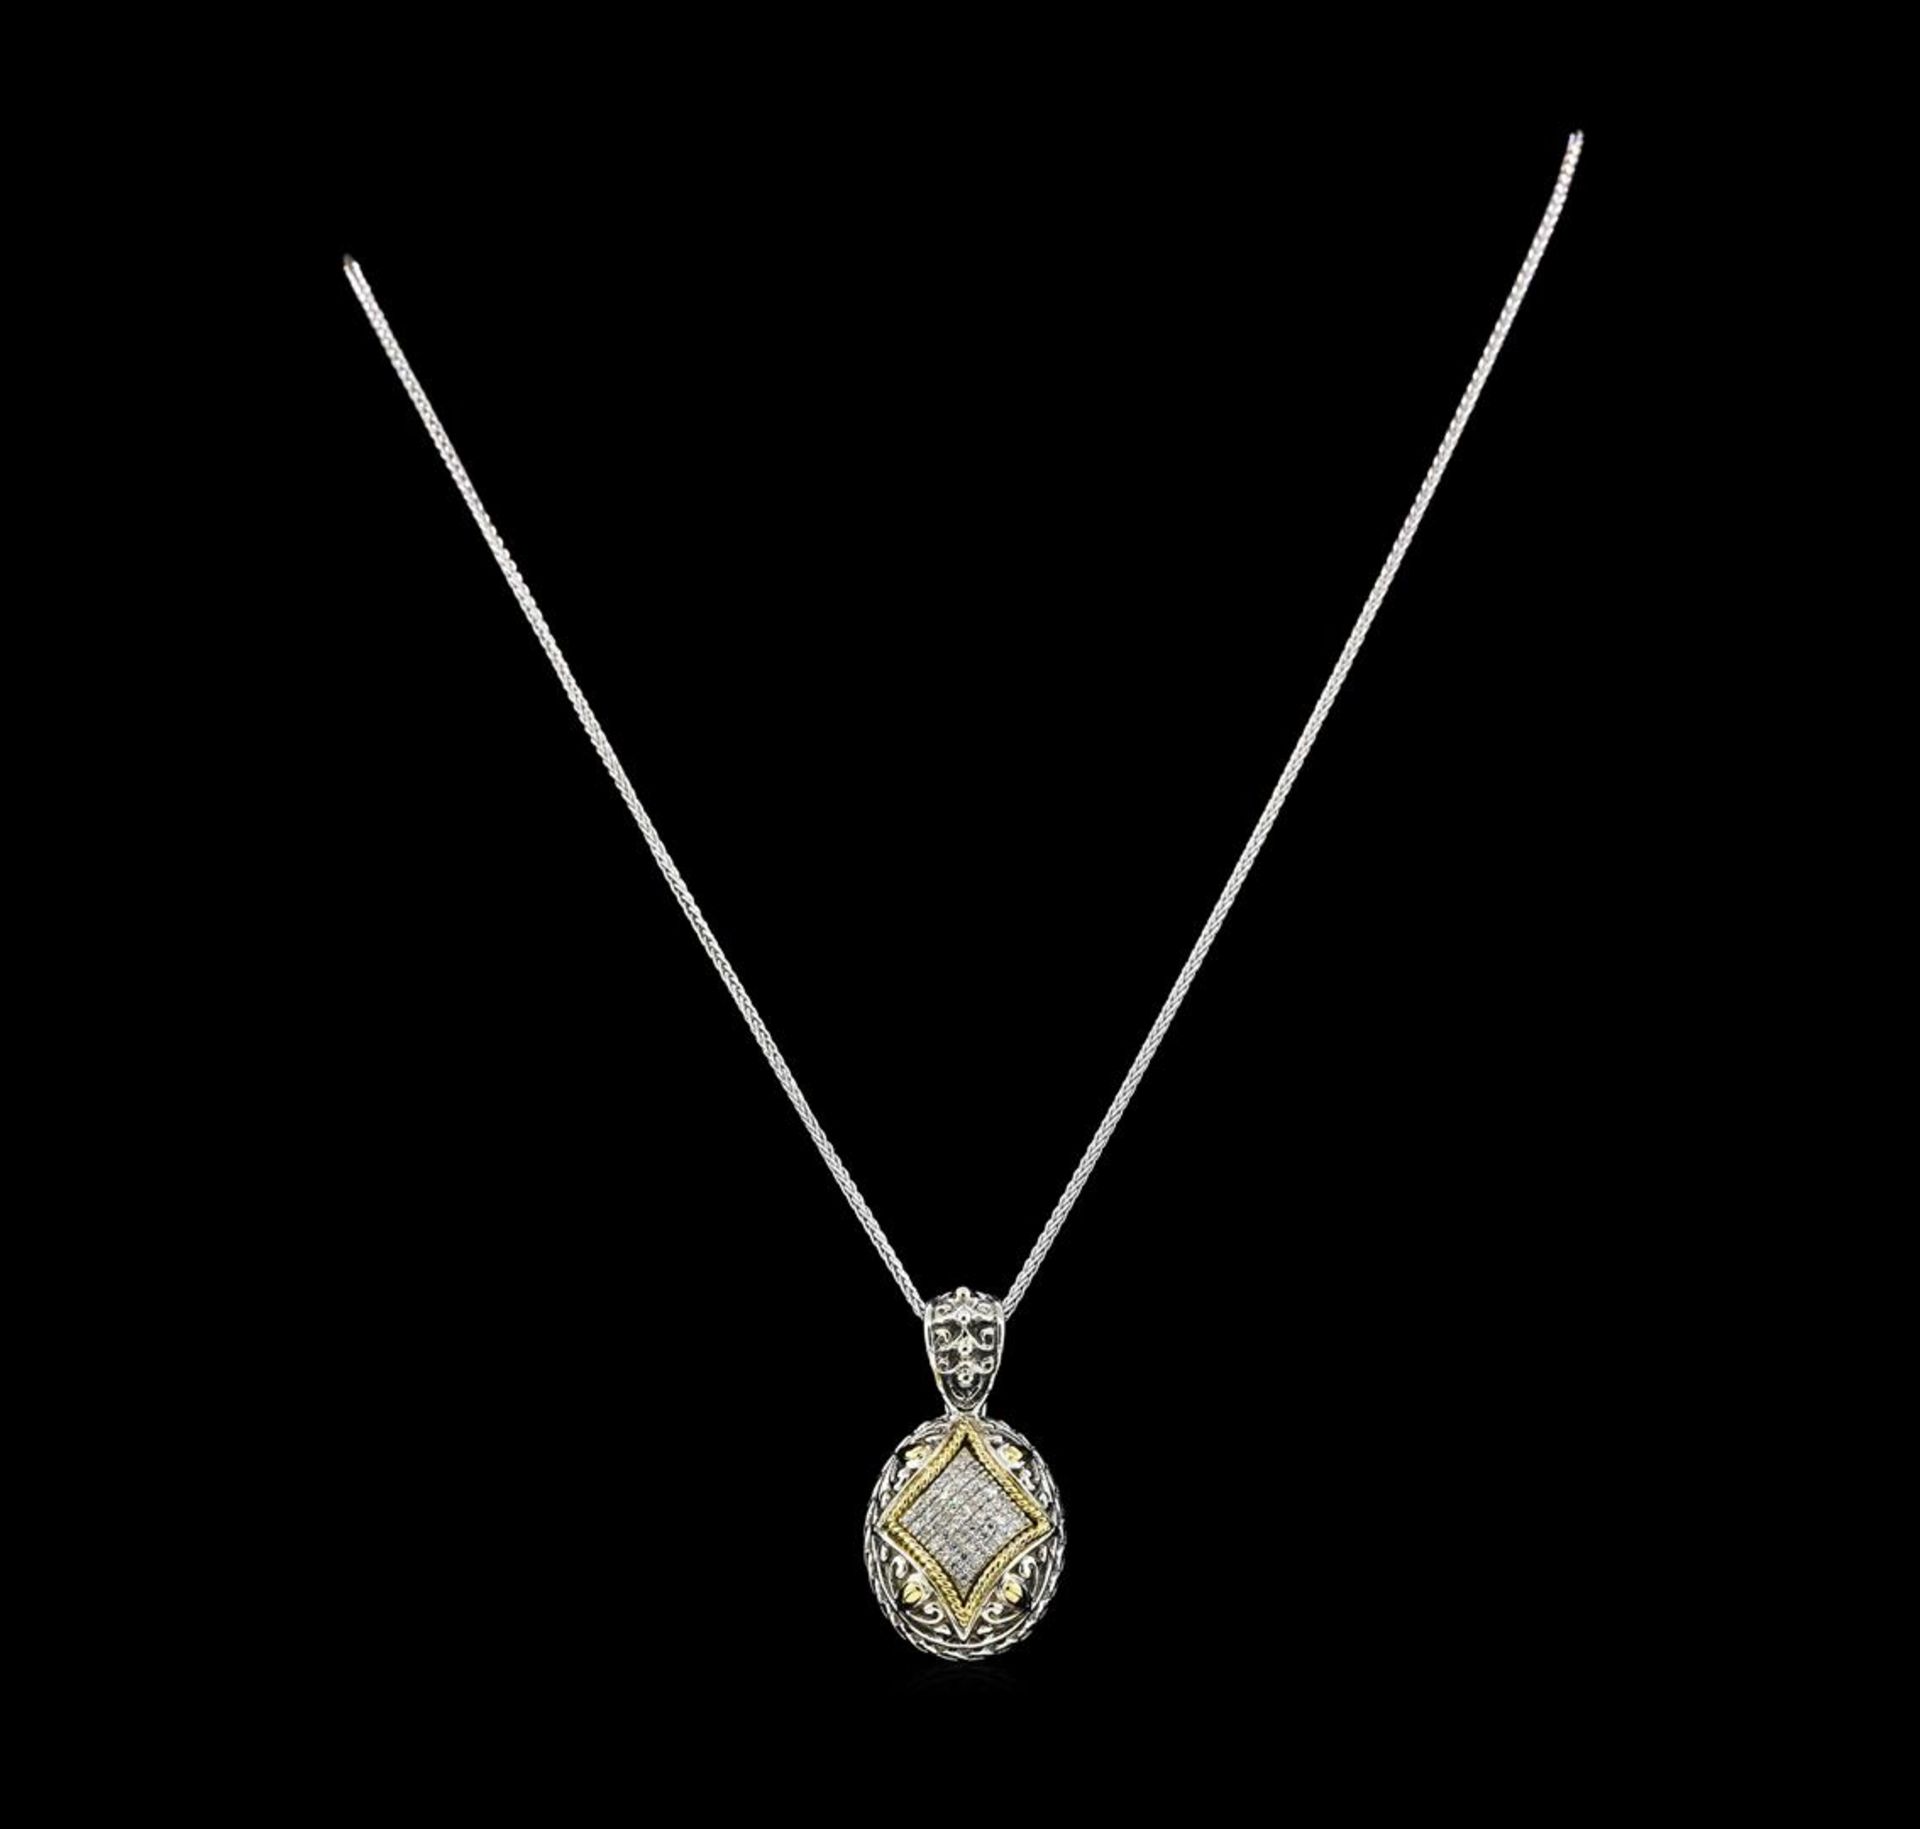 0.25 ctw Diamond Pendant and Chain - Silver/18KT Yellow Gold - Image 2 of 3